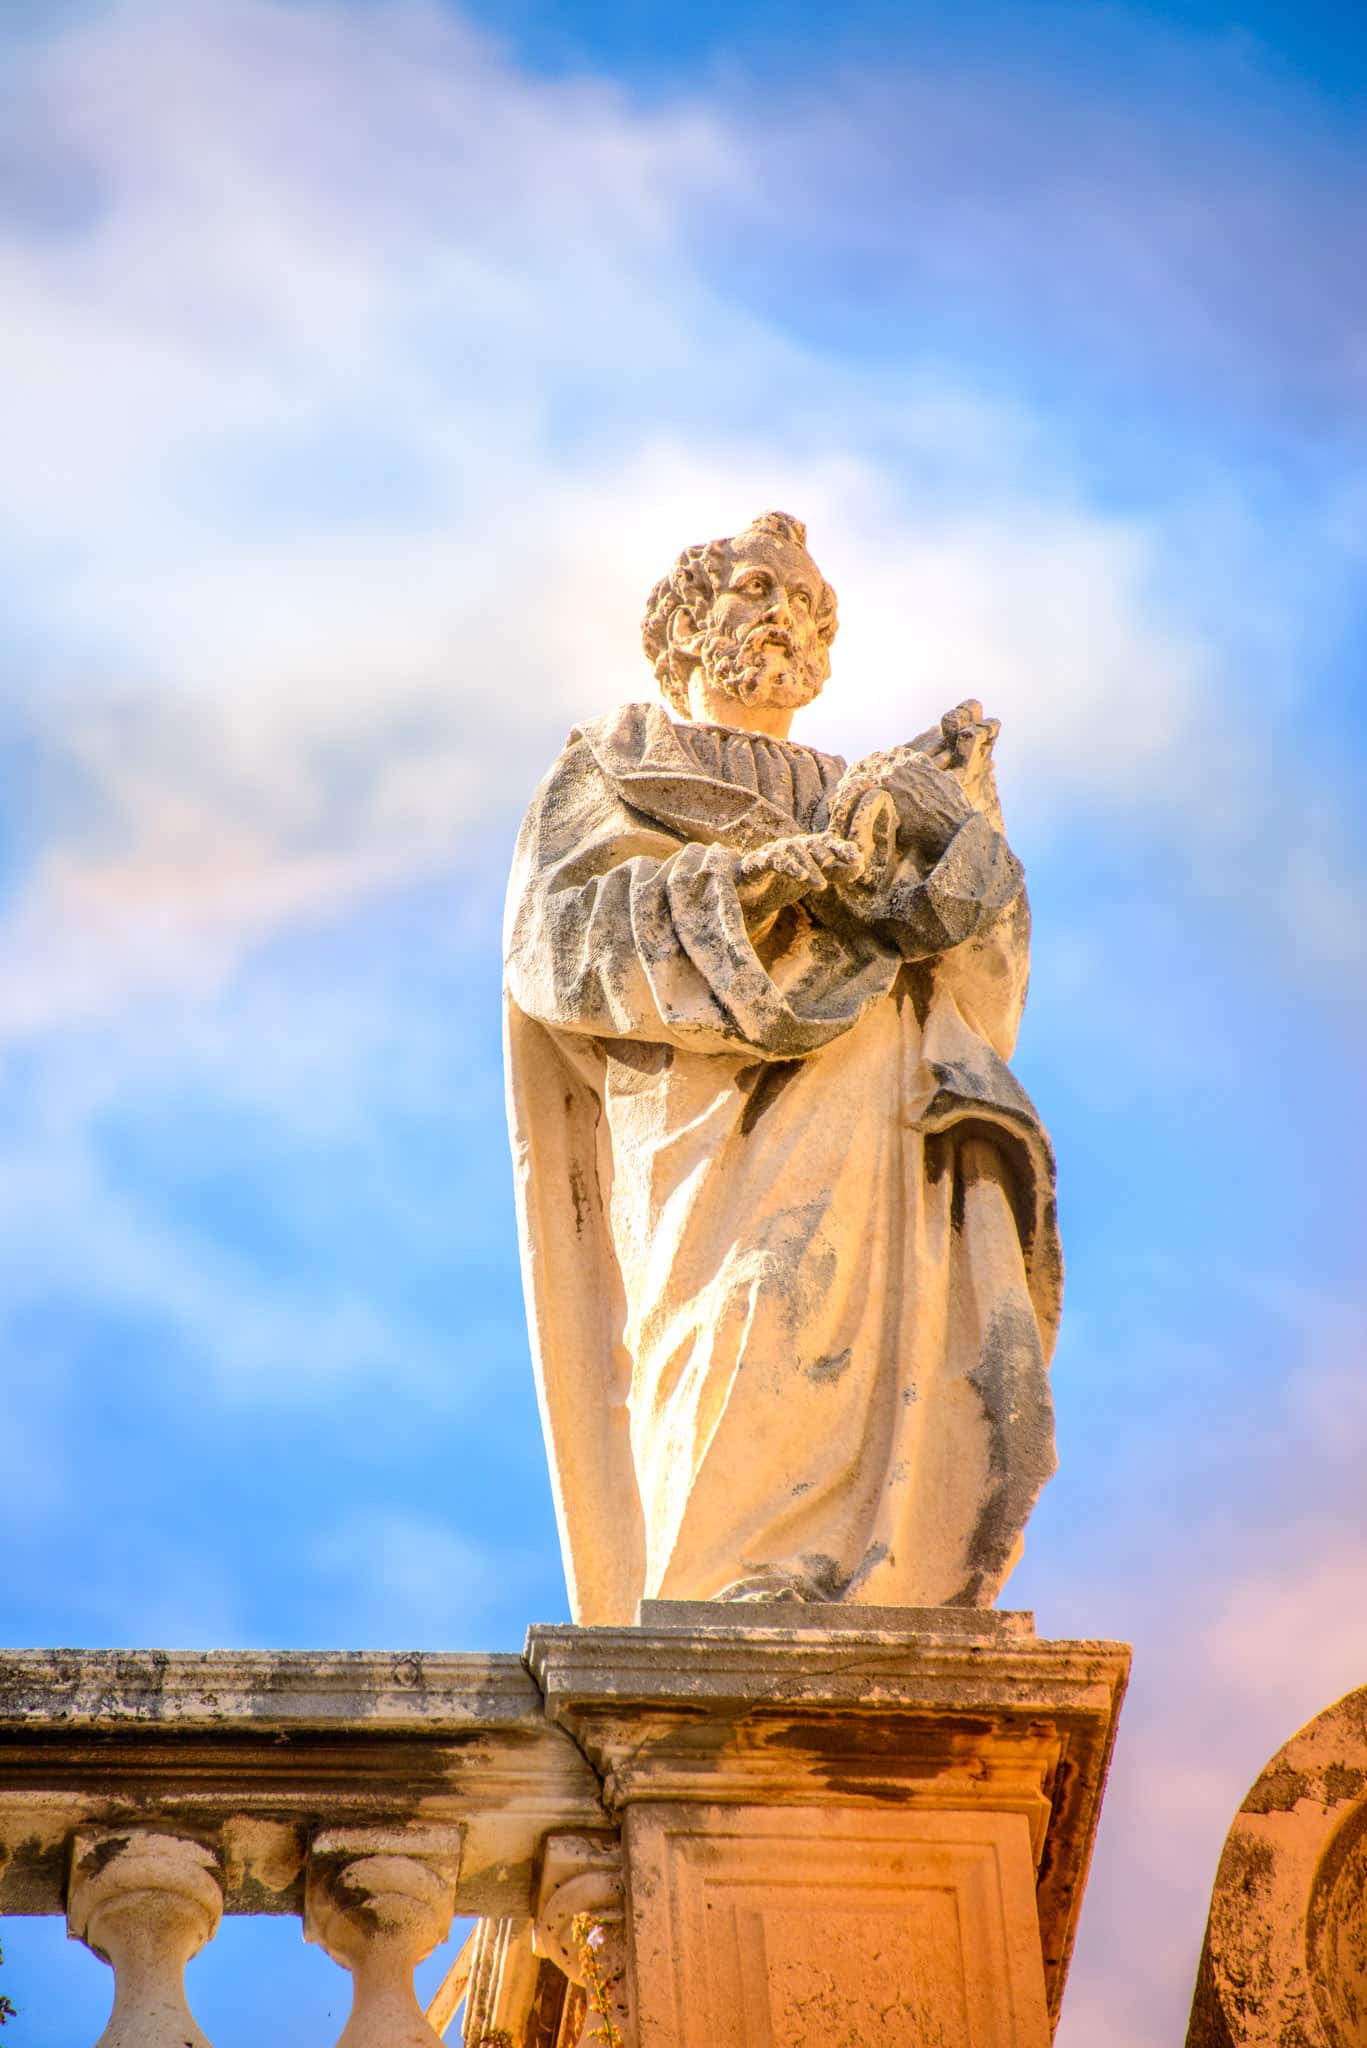 A close-up of one of the many statues that adorn the parapets of the Dubrovnik Cathedral in Dubrovnik Old Town in Croatia.